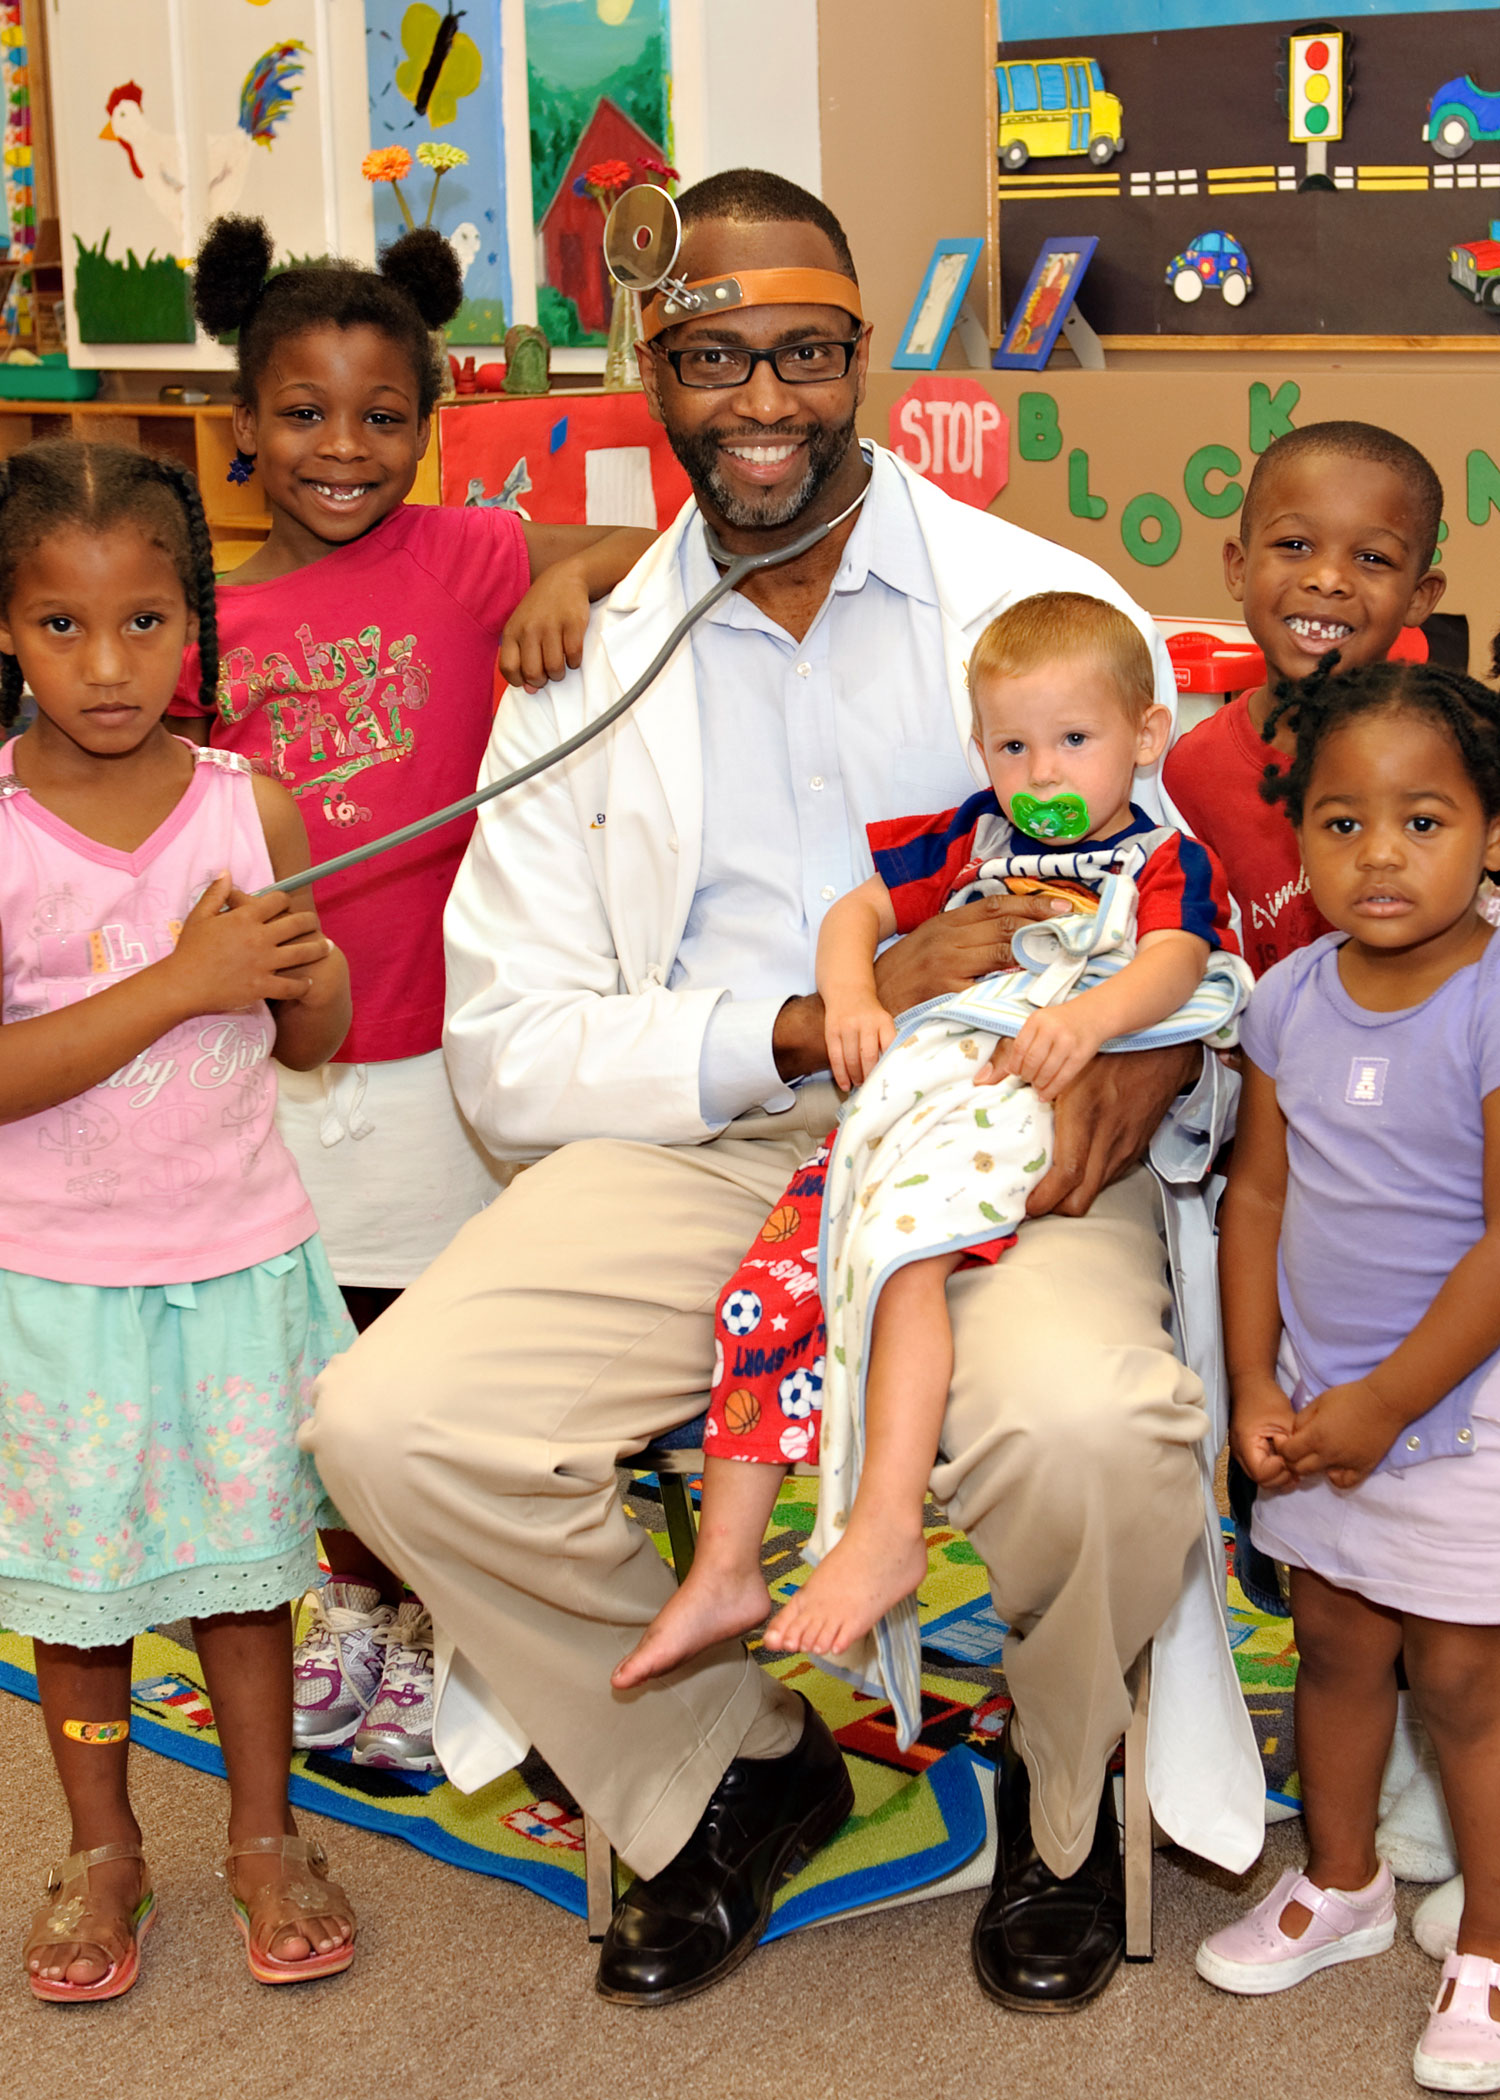 Dr. Charles Moore with pediatric patients at the Healing Community Center.